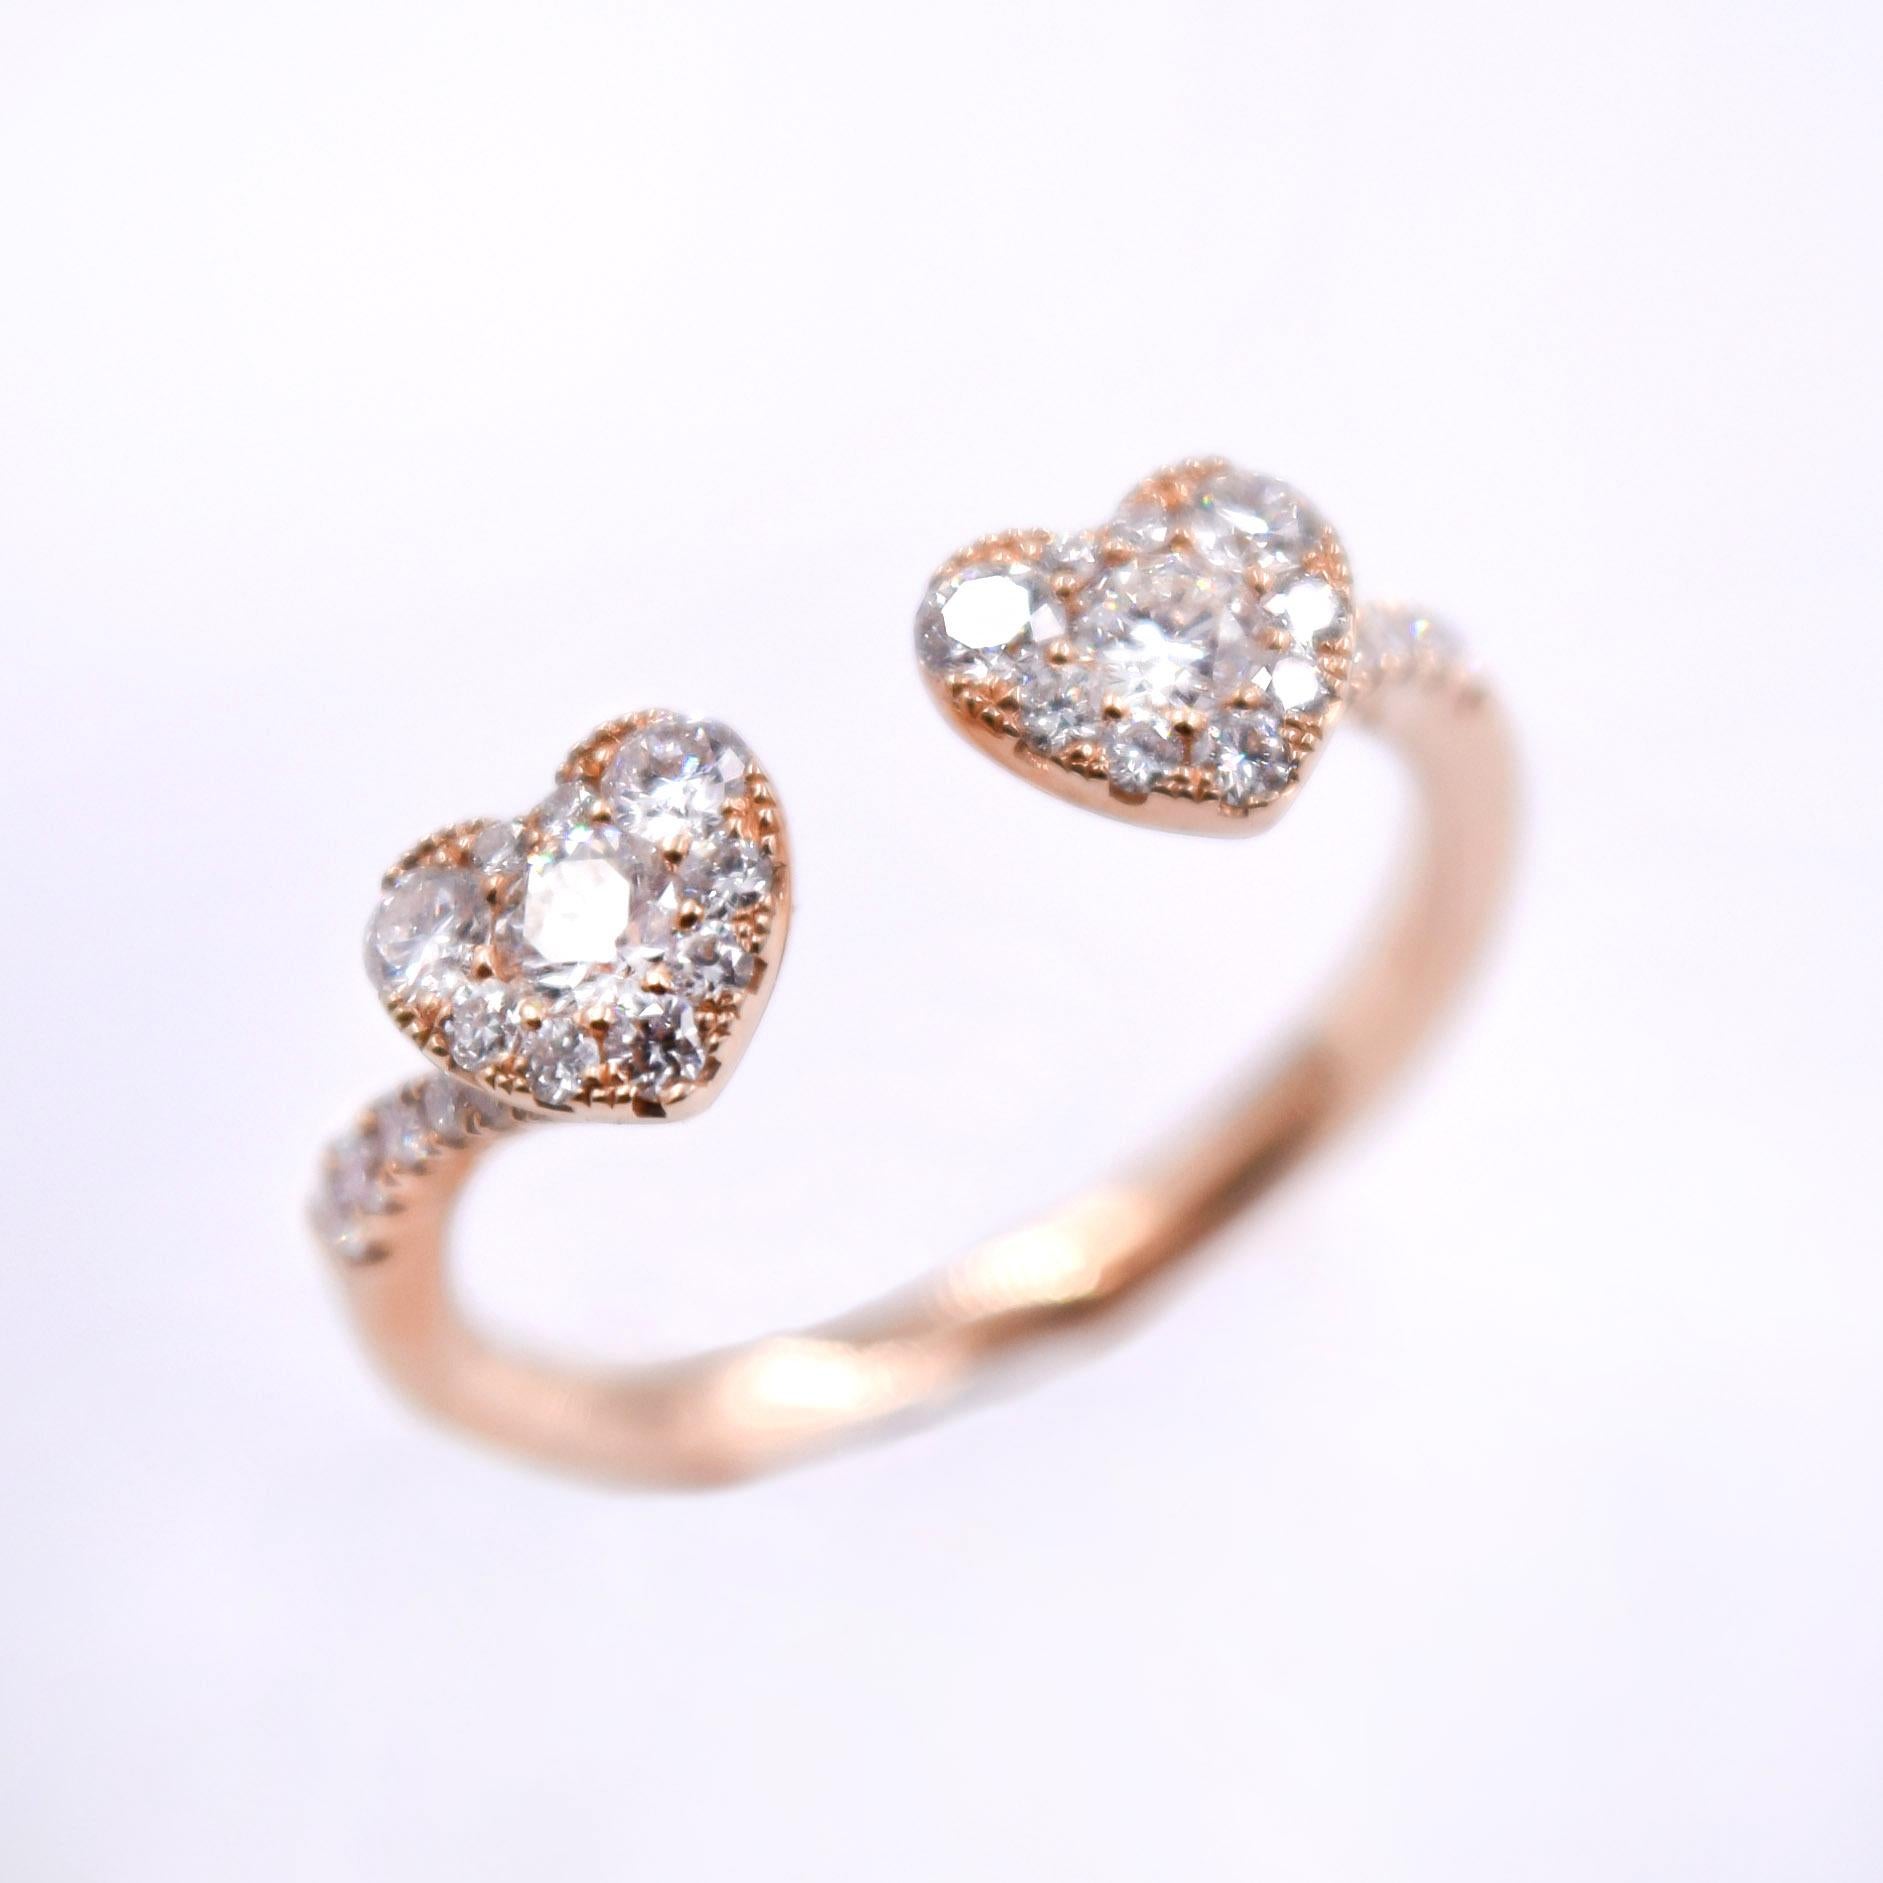 This beautiful ring is the perfect gift for her.

The ring features 0.49 carats of round white diamonds which are prong set in the heart shaped setting. Five round white diamonds are prong set on each side of the 18 karat rose gold shank. 
Size of